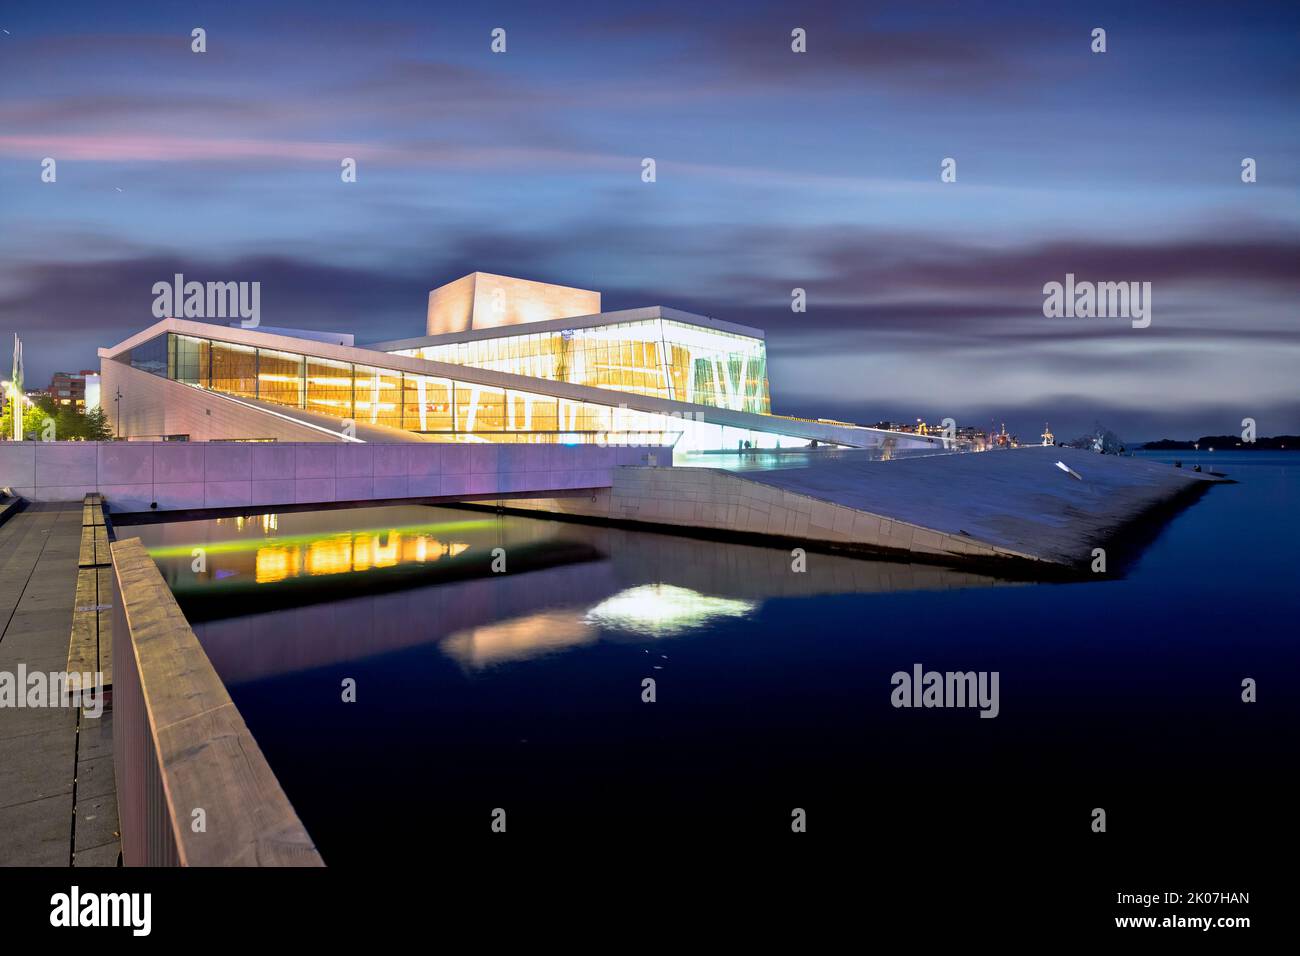 Oslo Opera house modern architecture evening view, capital of Norway Stock Photo